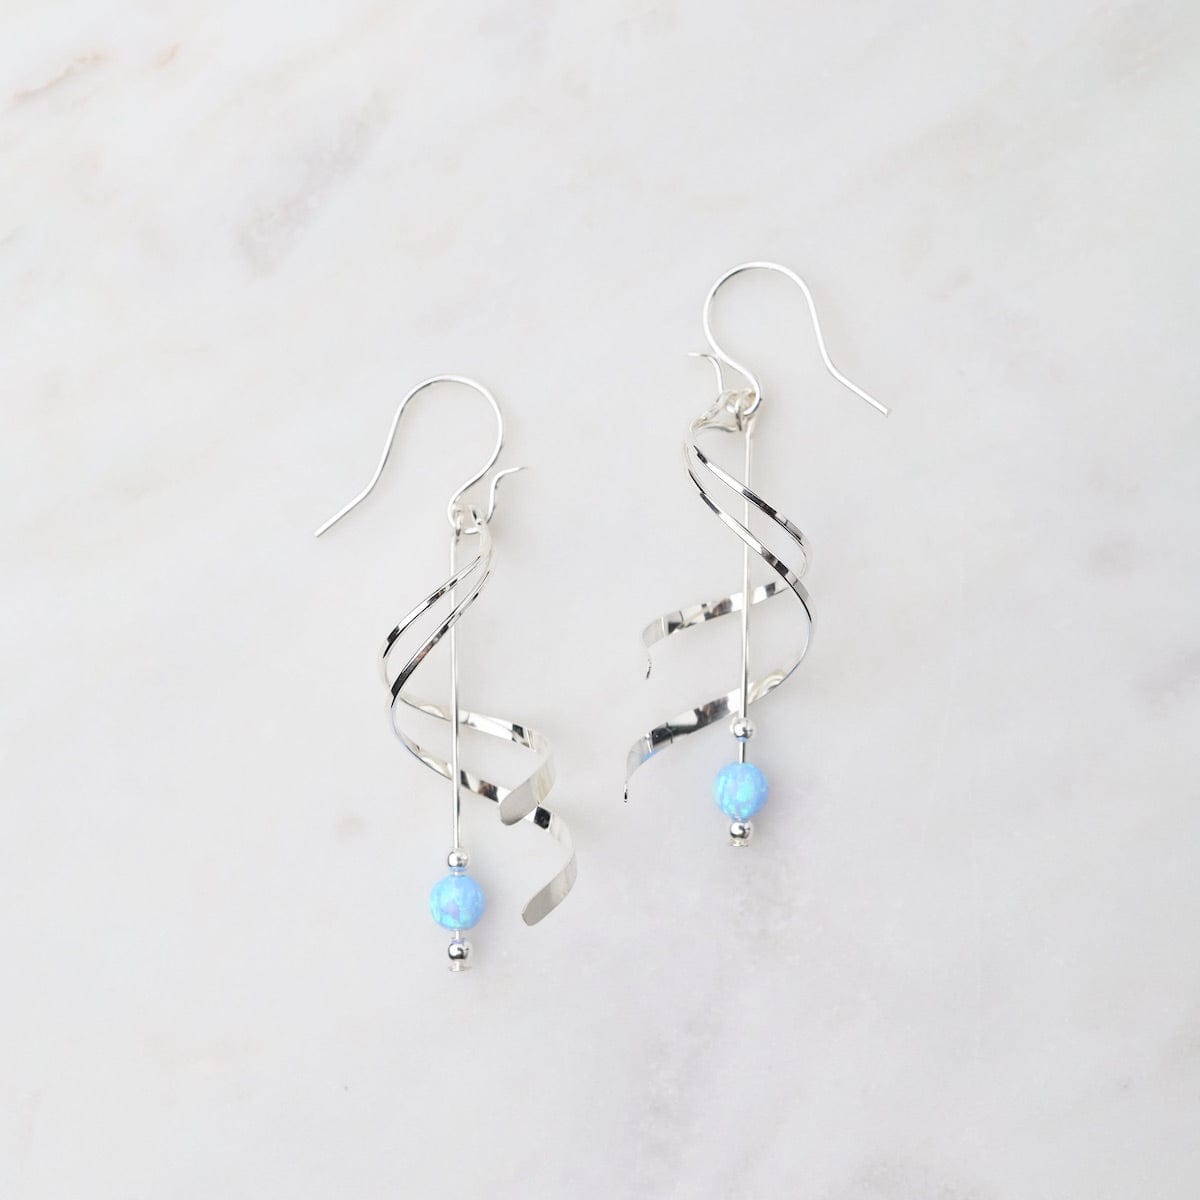 EAR Double Spiral with Hanging Blue Opal Ball Earrings